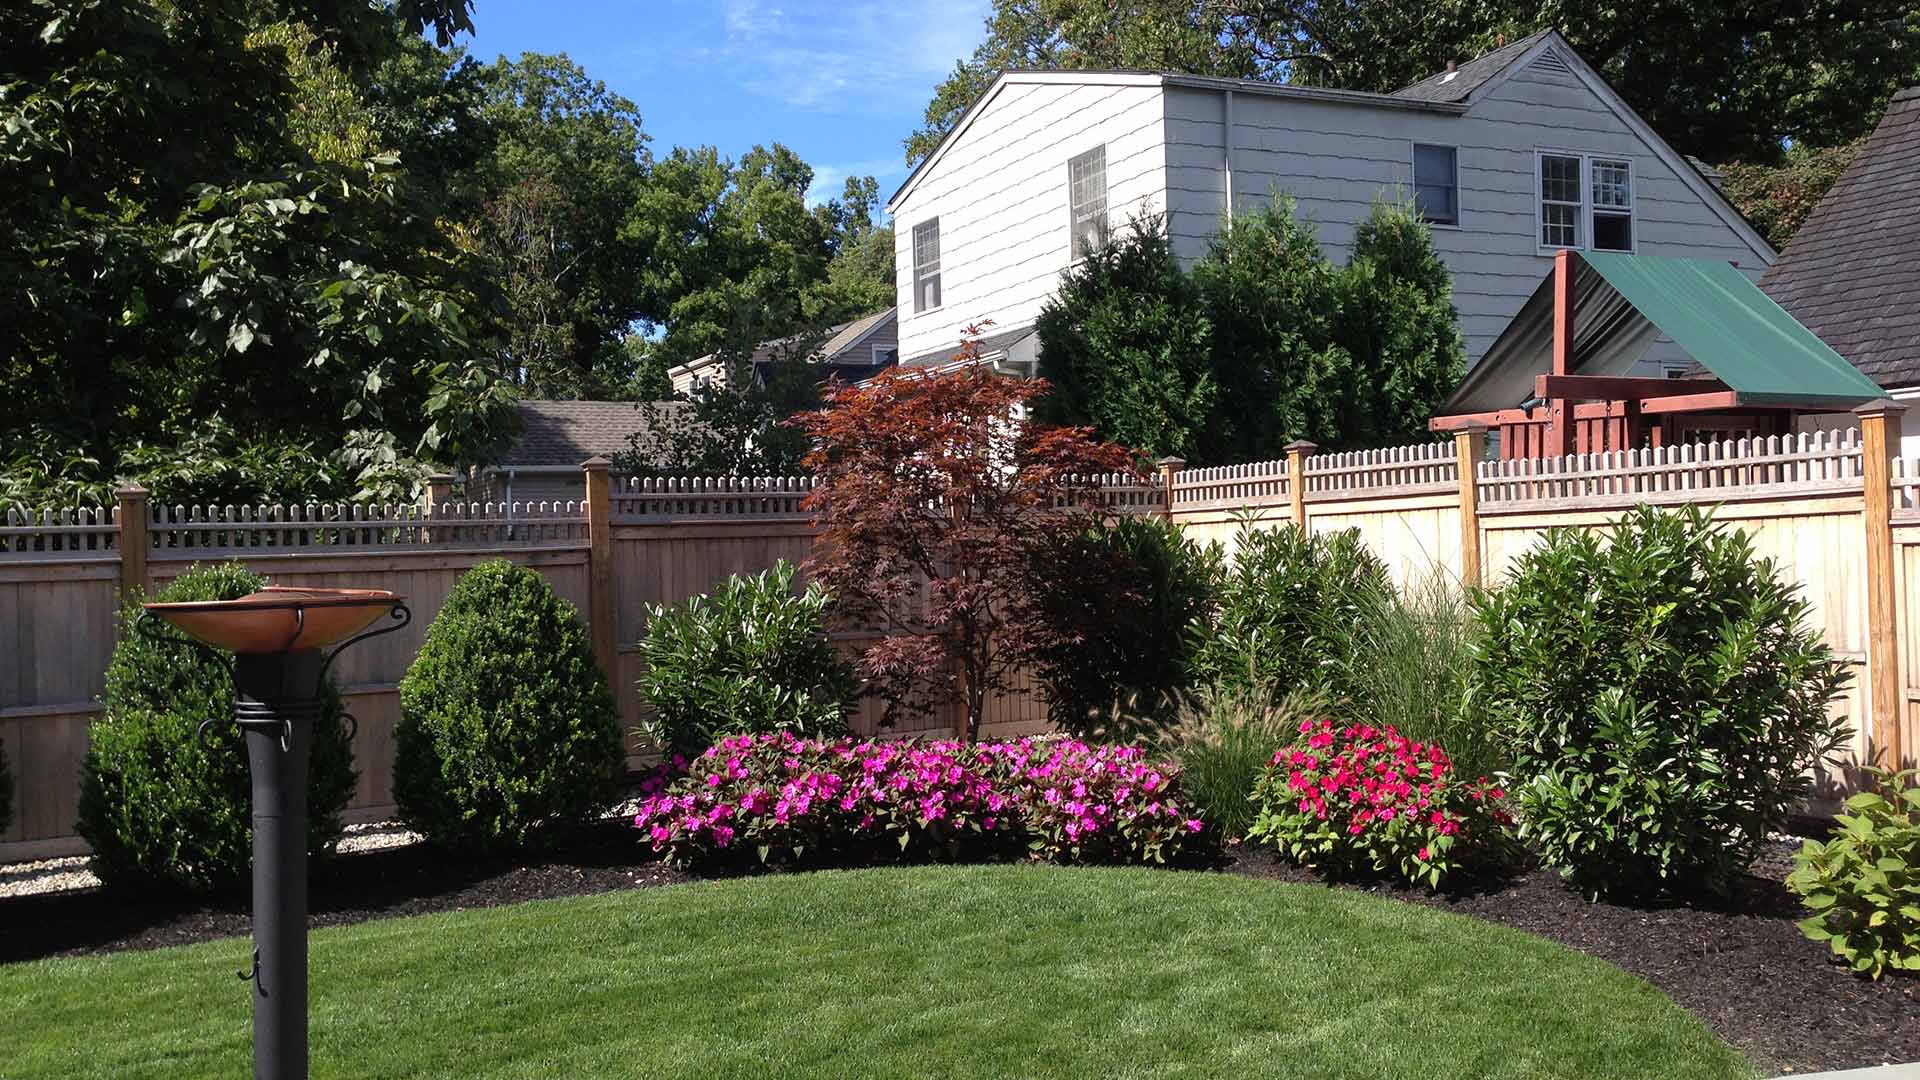 Well trimmed and properly landscaped home back yard in Plainfield, NJ.